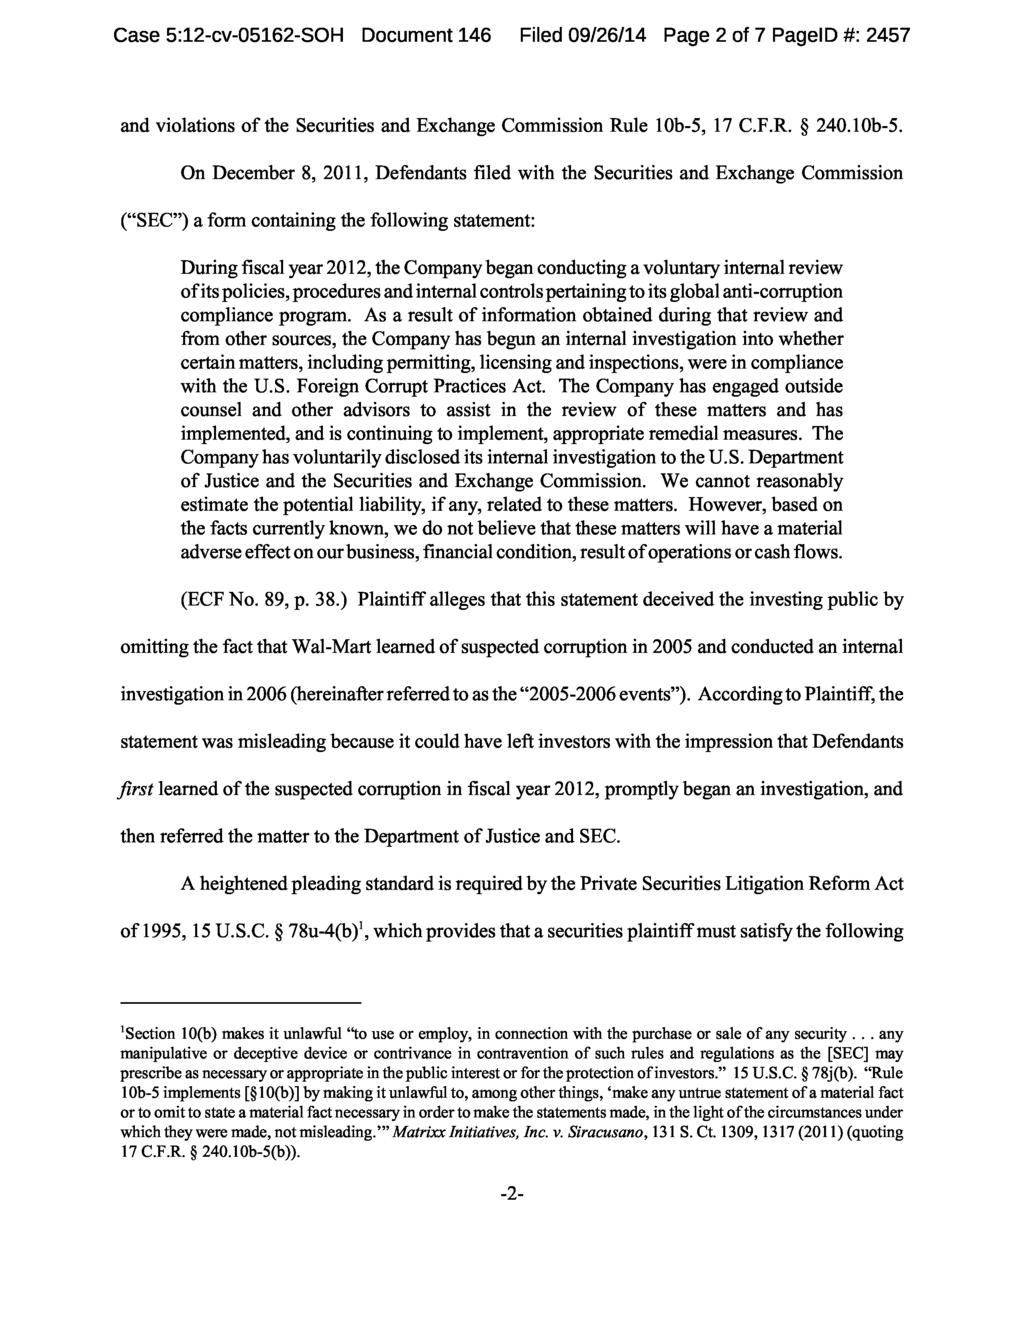 Case 5:12-cv-05162-SOH Document 146 Filed 09/26/14 Page 2 of 7 PageID #: 2457 and violations of the Securities and Exchange Commission Rule 10b-5,